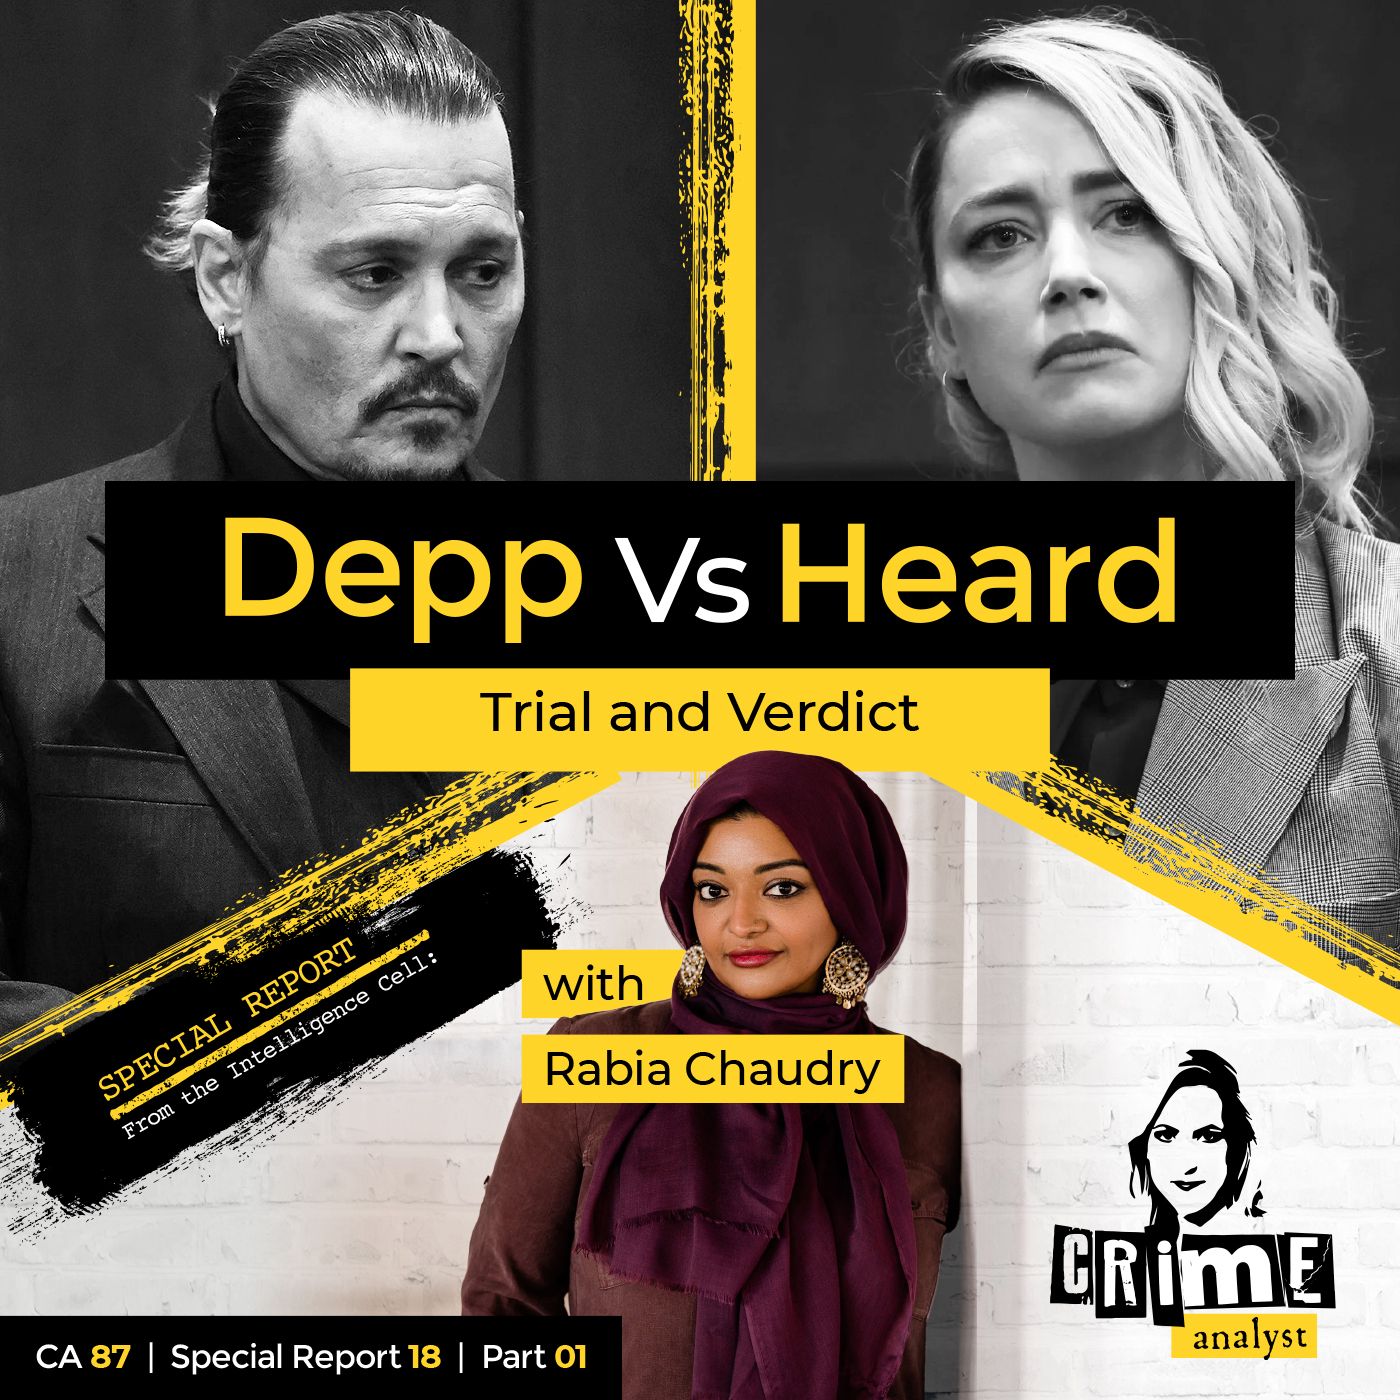 87: The Crime Analyst | Ep 87 | Depp vs Heard Trial and Verdict with Rabia Chaudry, Part 1 Image